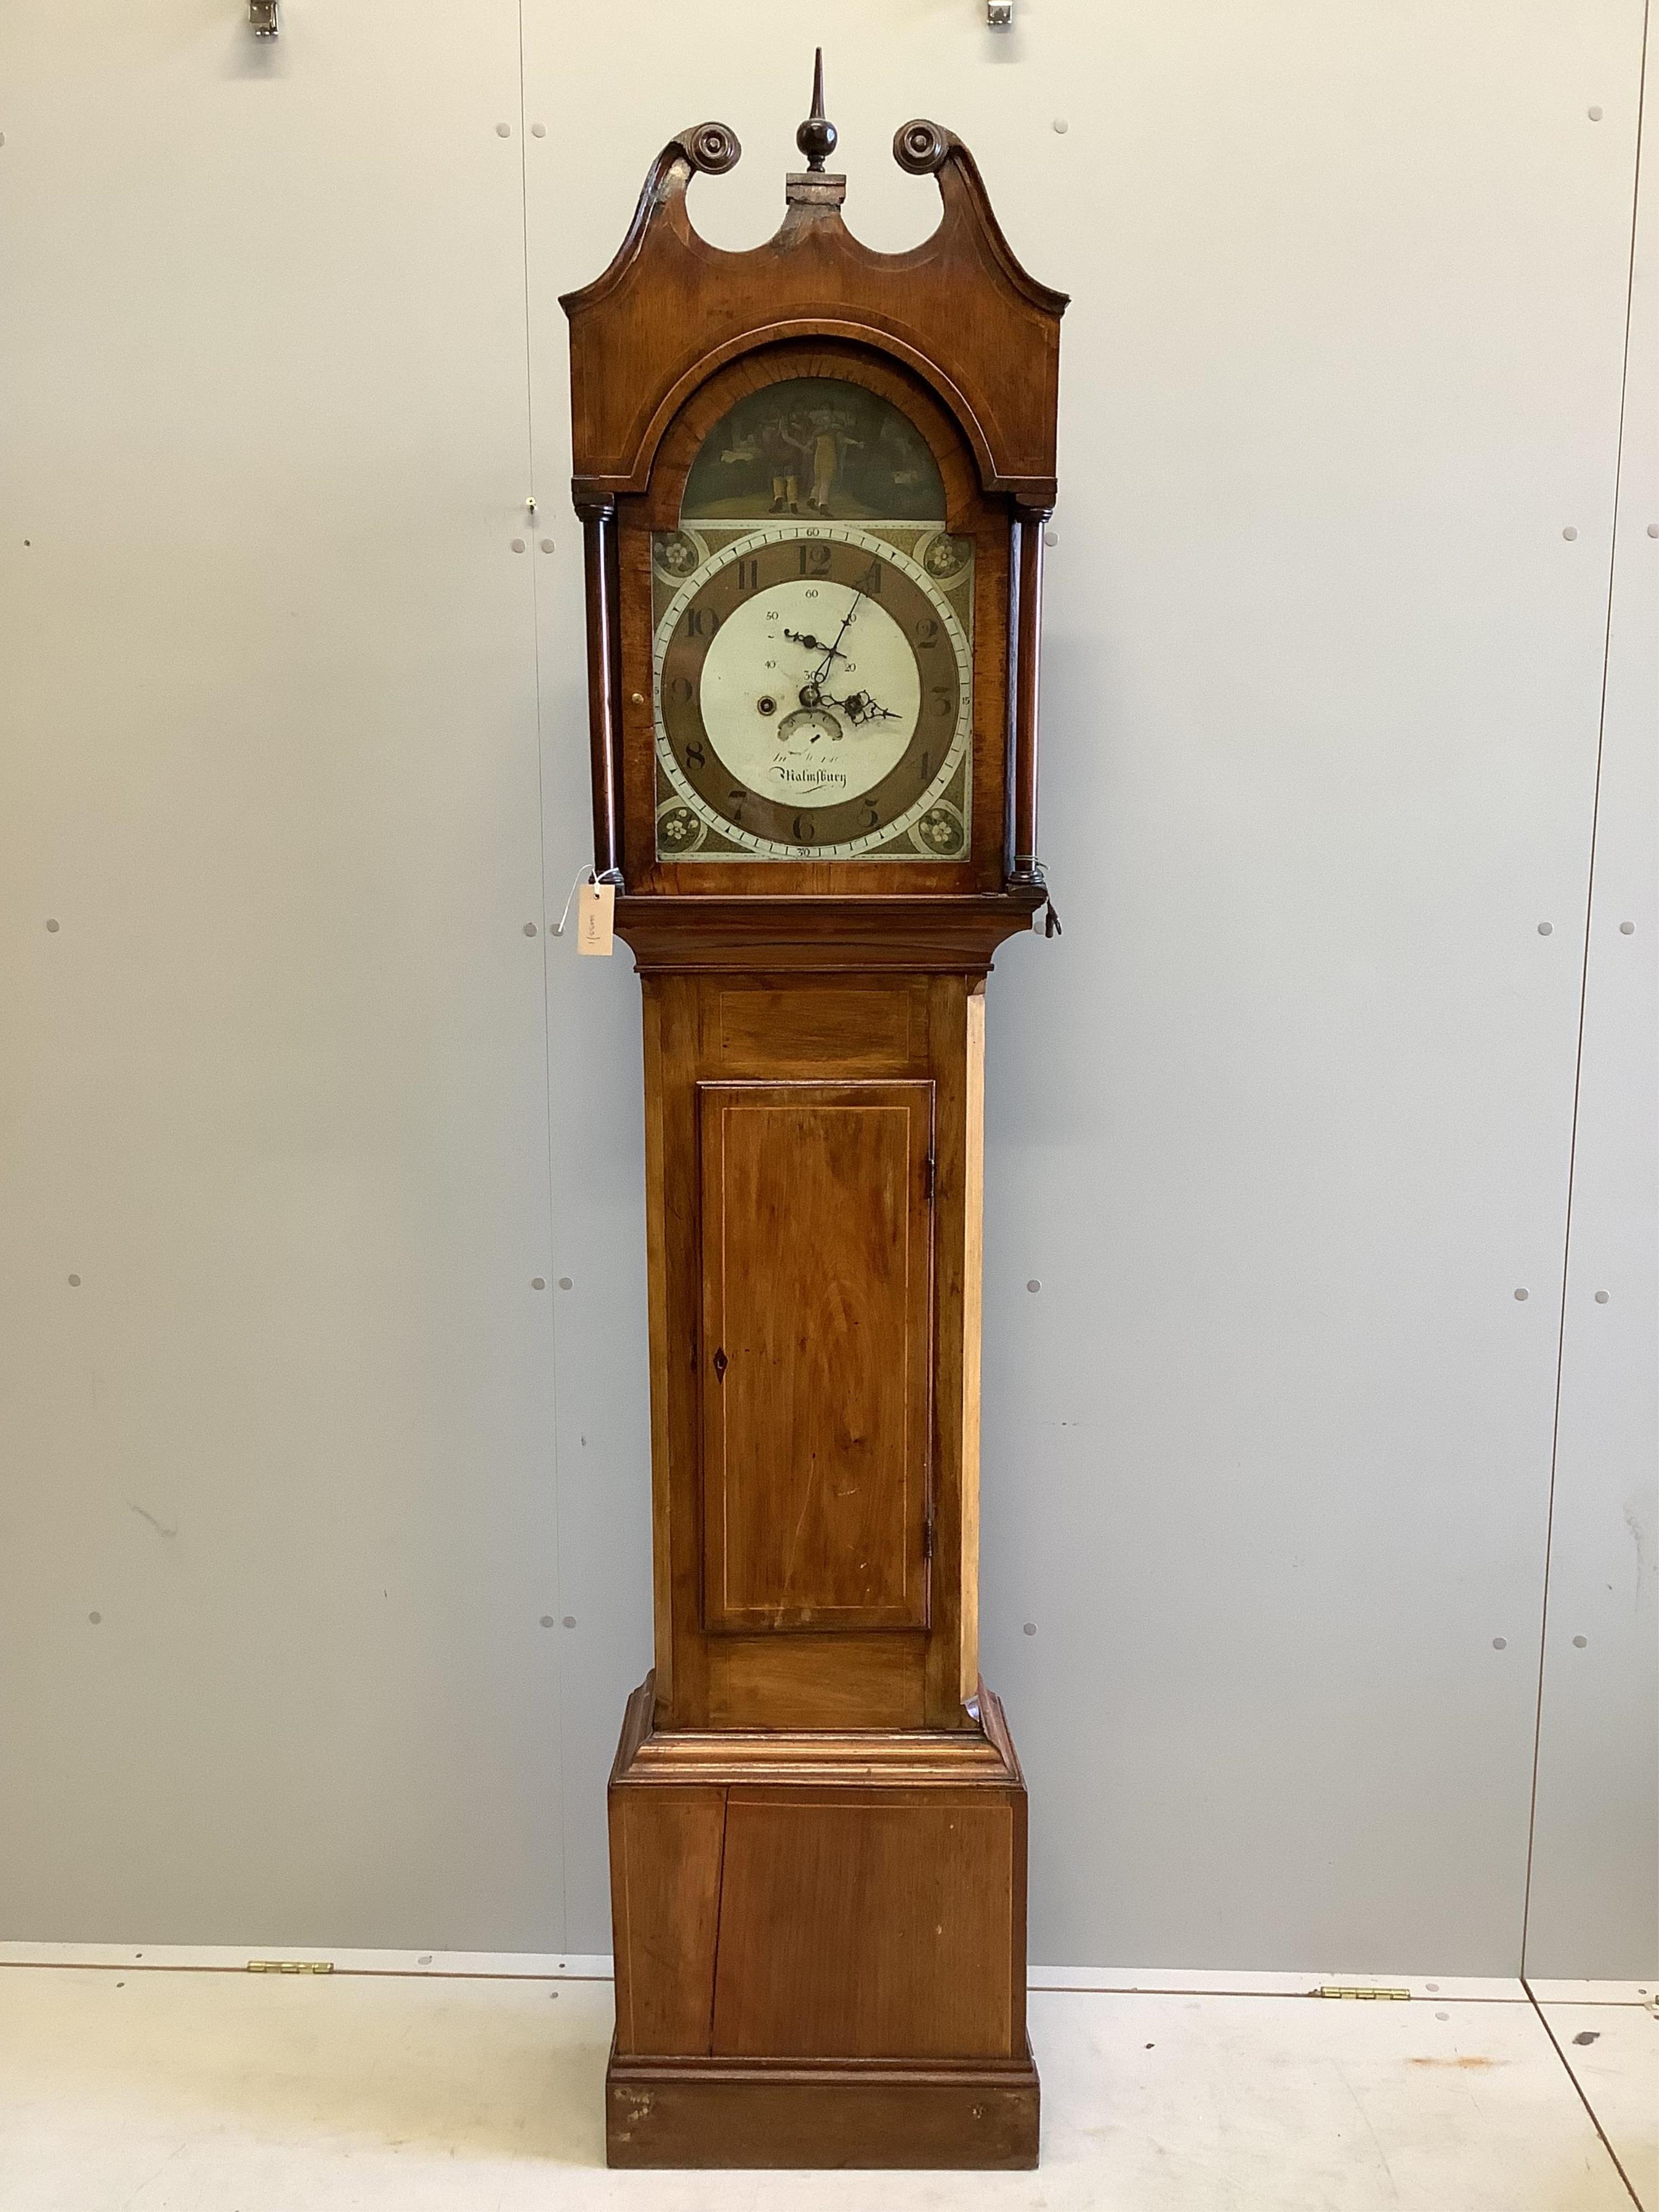 An early 19th century mahogany eight day longcase clock, height 216cm. Condition - poor